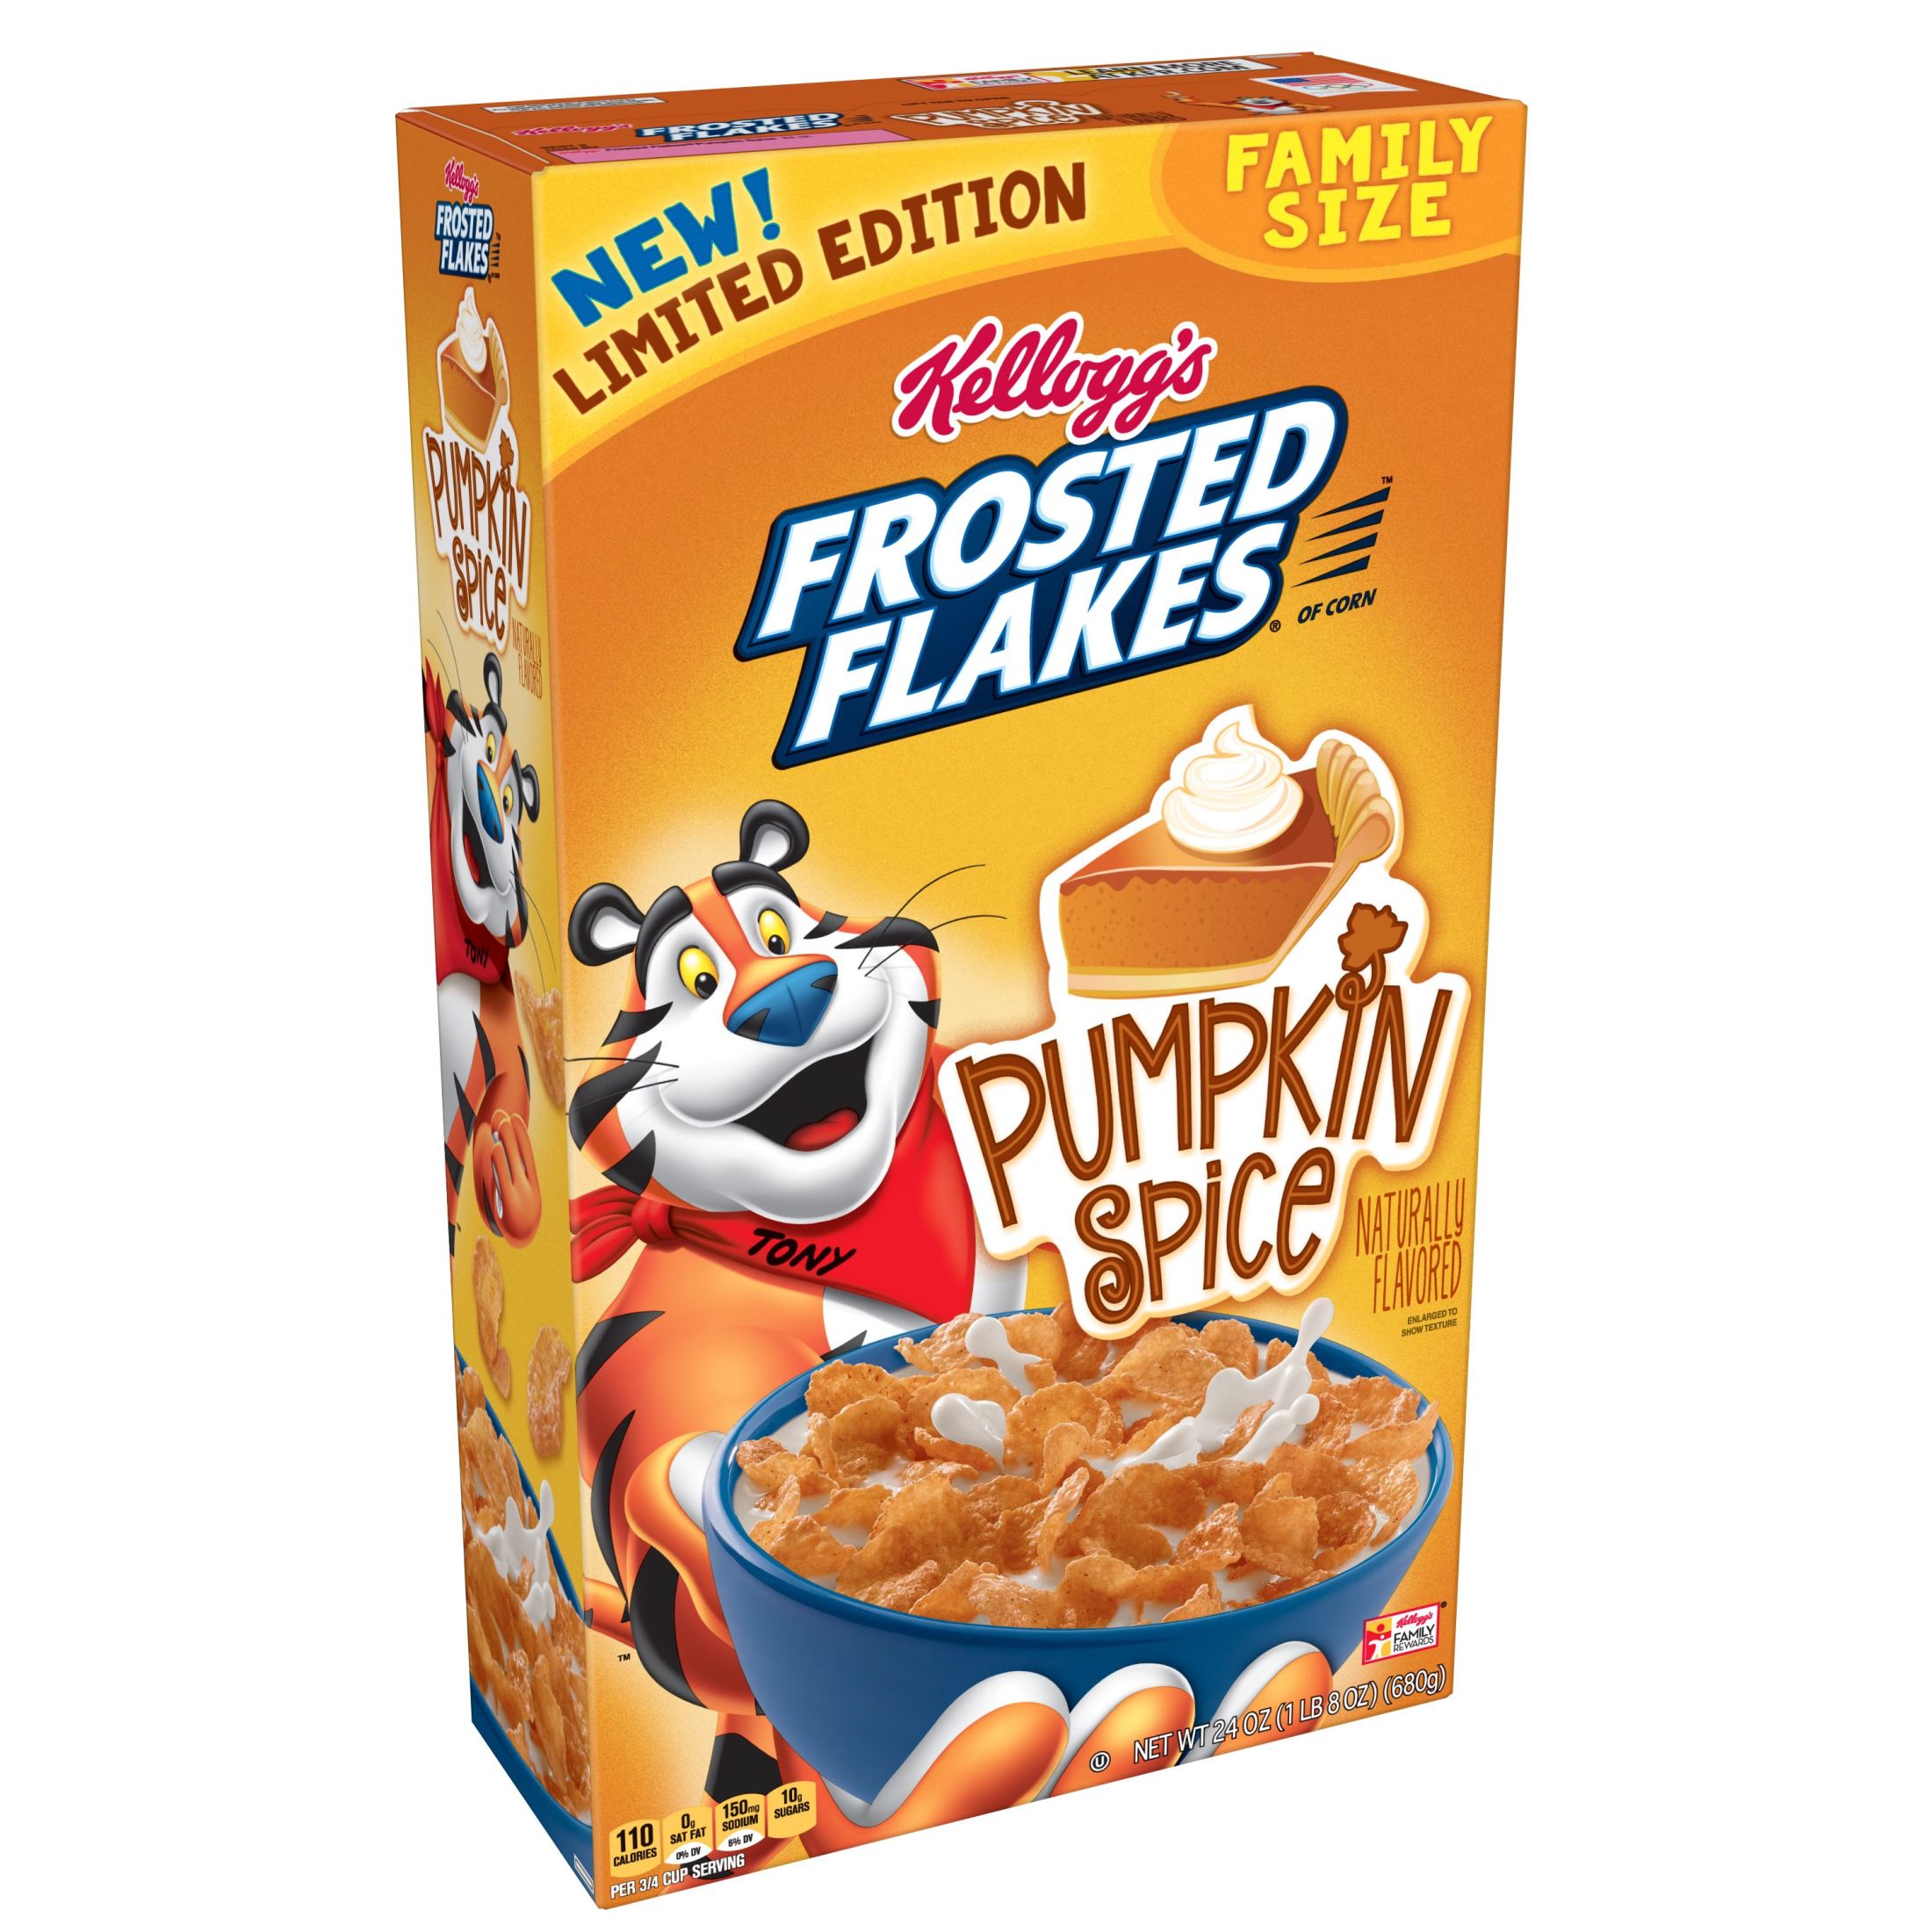 Kellogg's Frosted Flakes Pumpkin Spice Cold Breakfast Cereal, Family Size, 24 oz Box - image 1 of 8